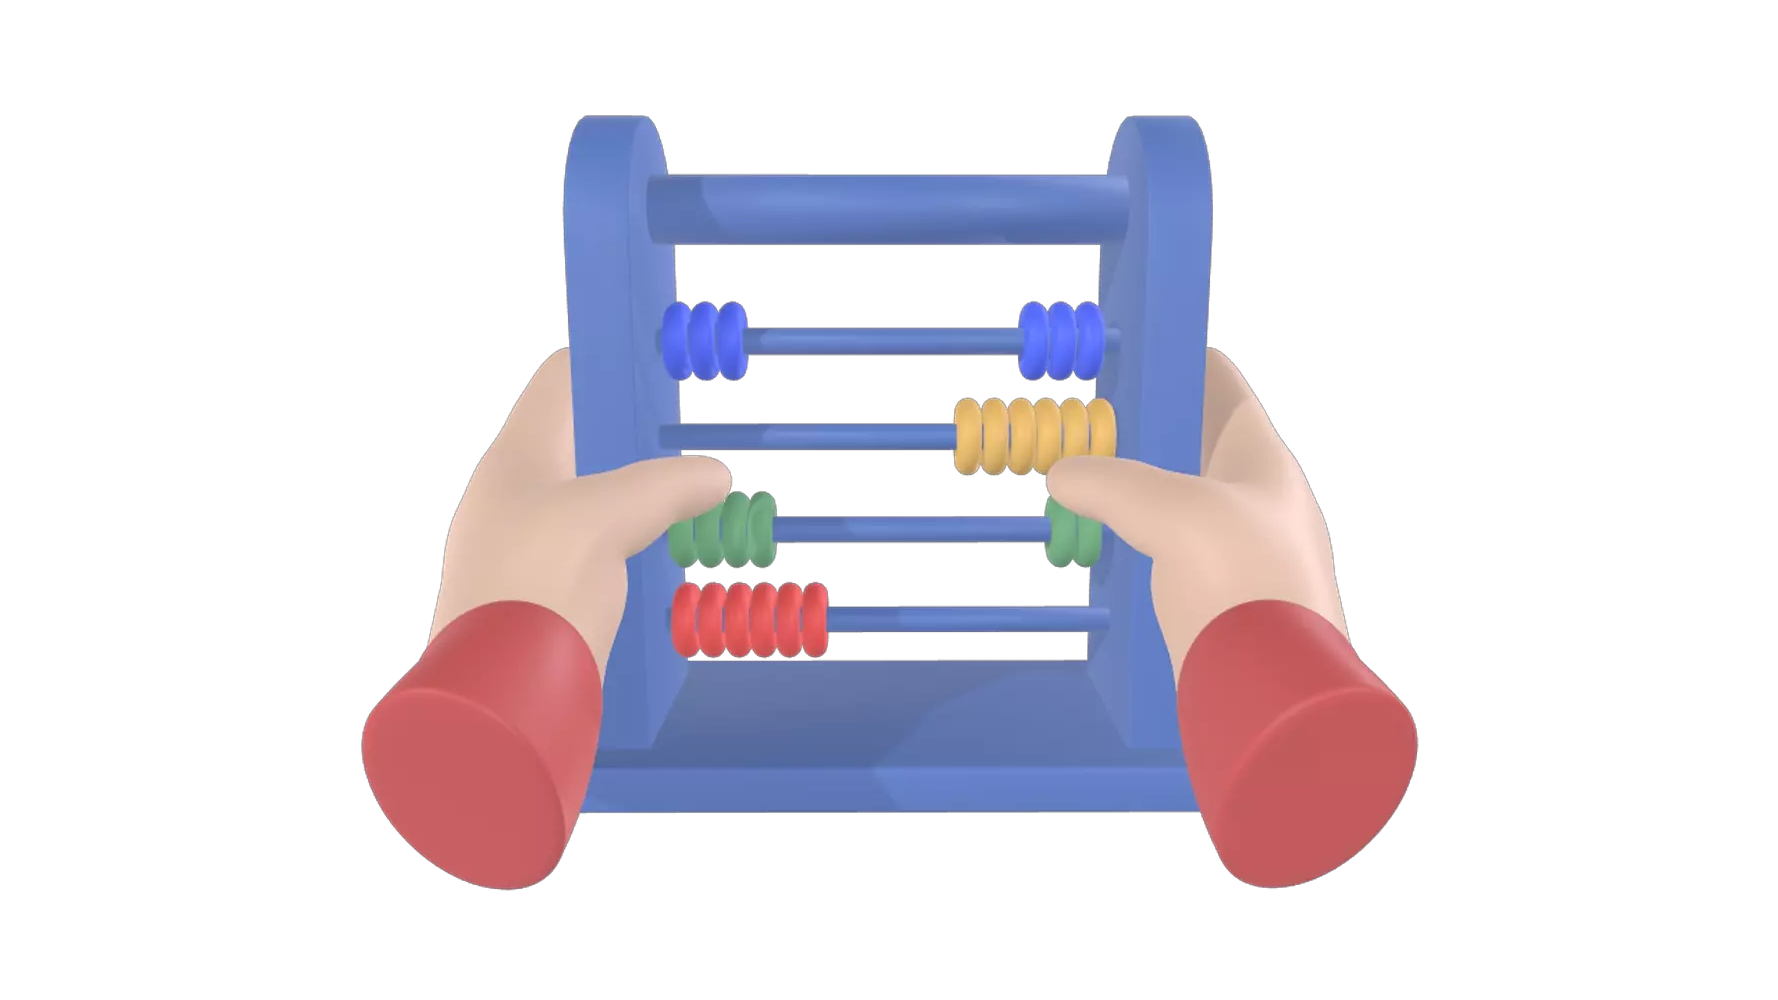 Abacus 3D Graphic